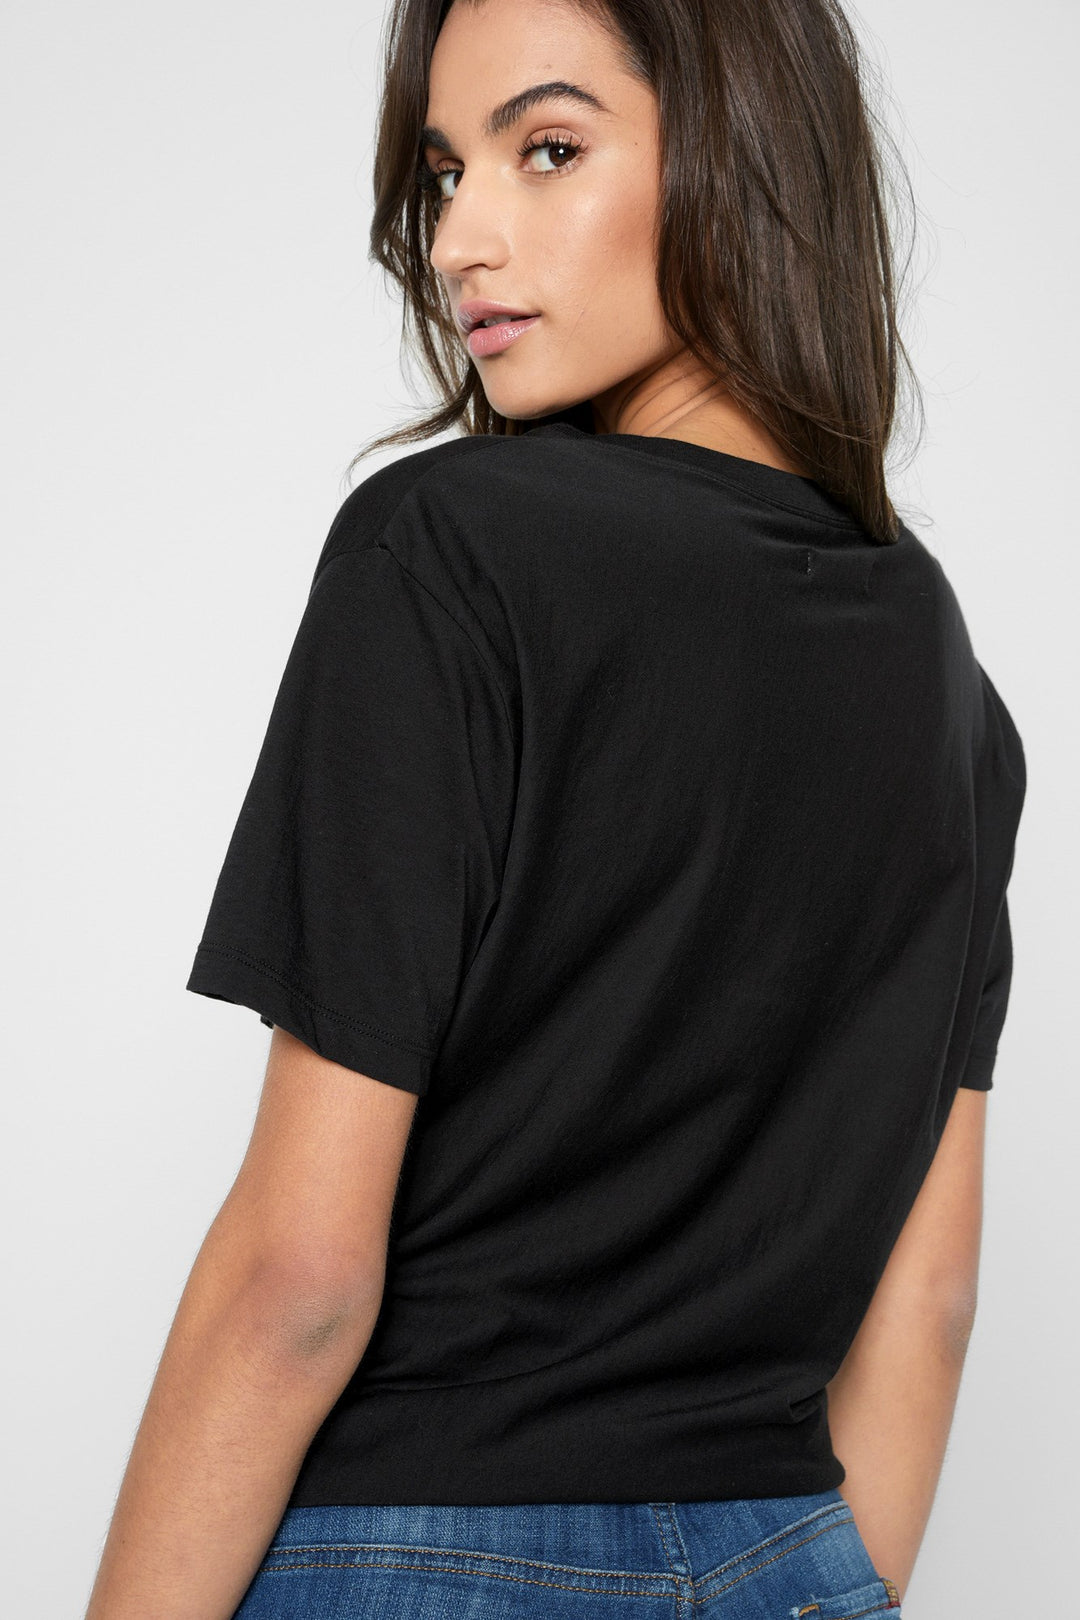 Seven for all Mankind - Knotted Front Tee Black